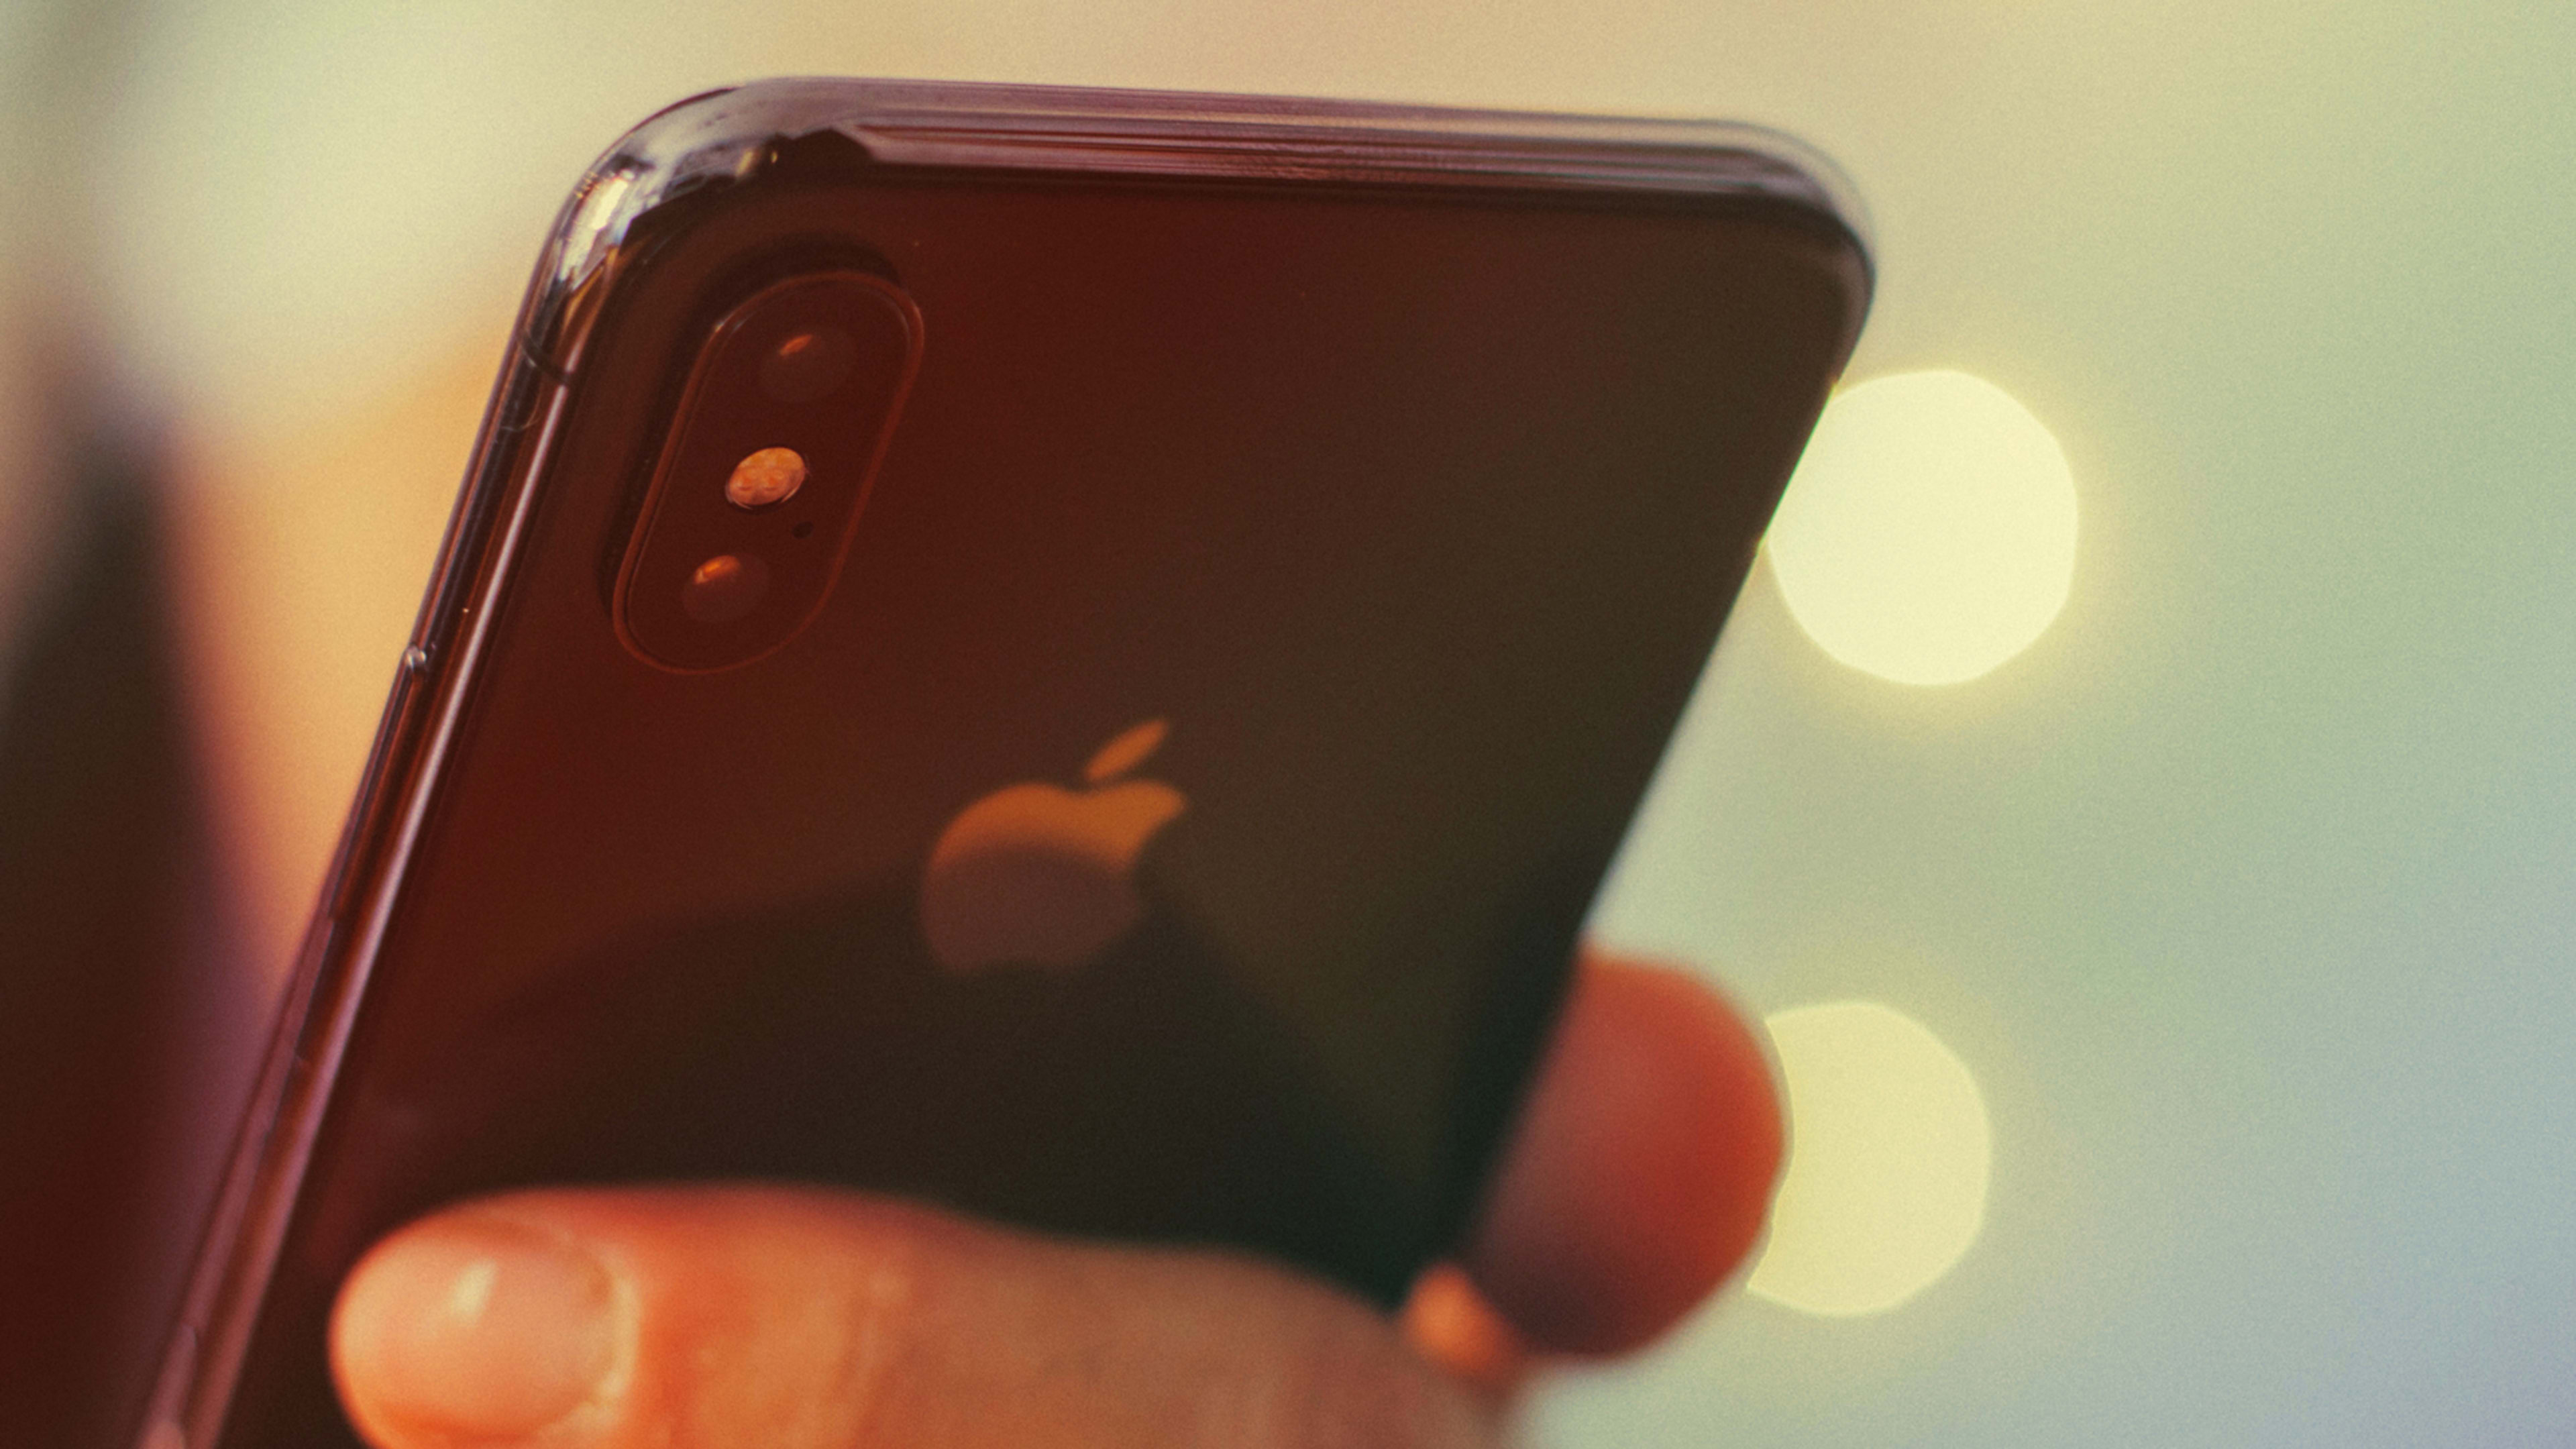 Report: Apple is bringing Touch ID back to iPhones in 2020